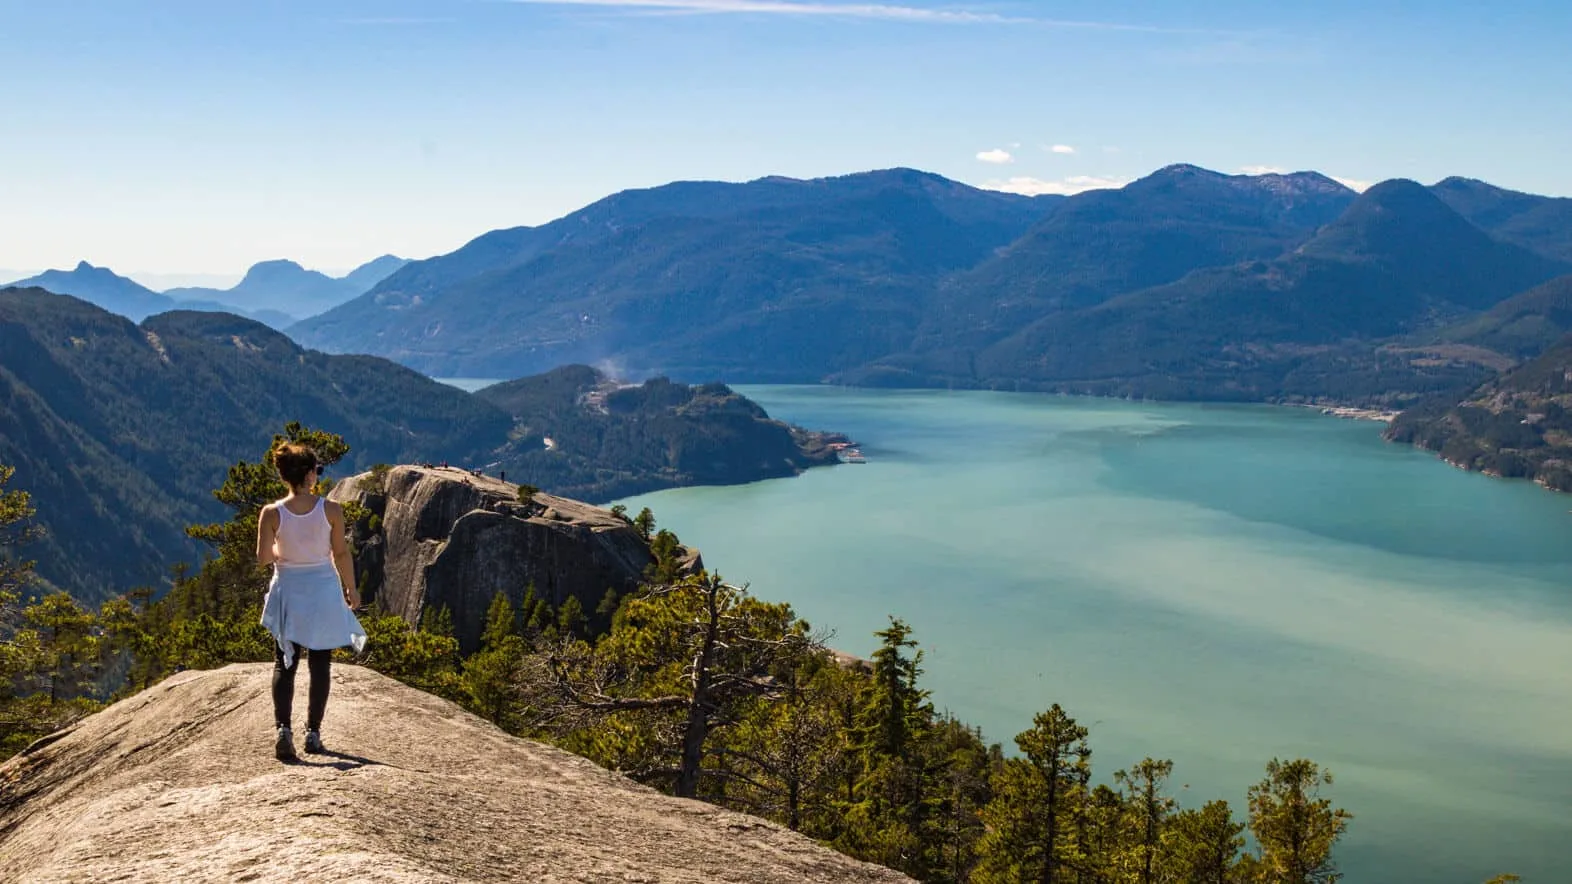 15 Vancouver Hikes That'll Take Your Breath Away (& Make You Sweat!)